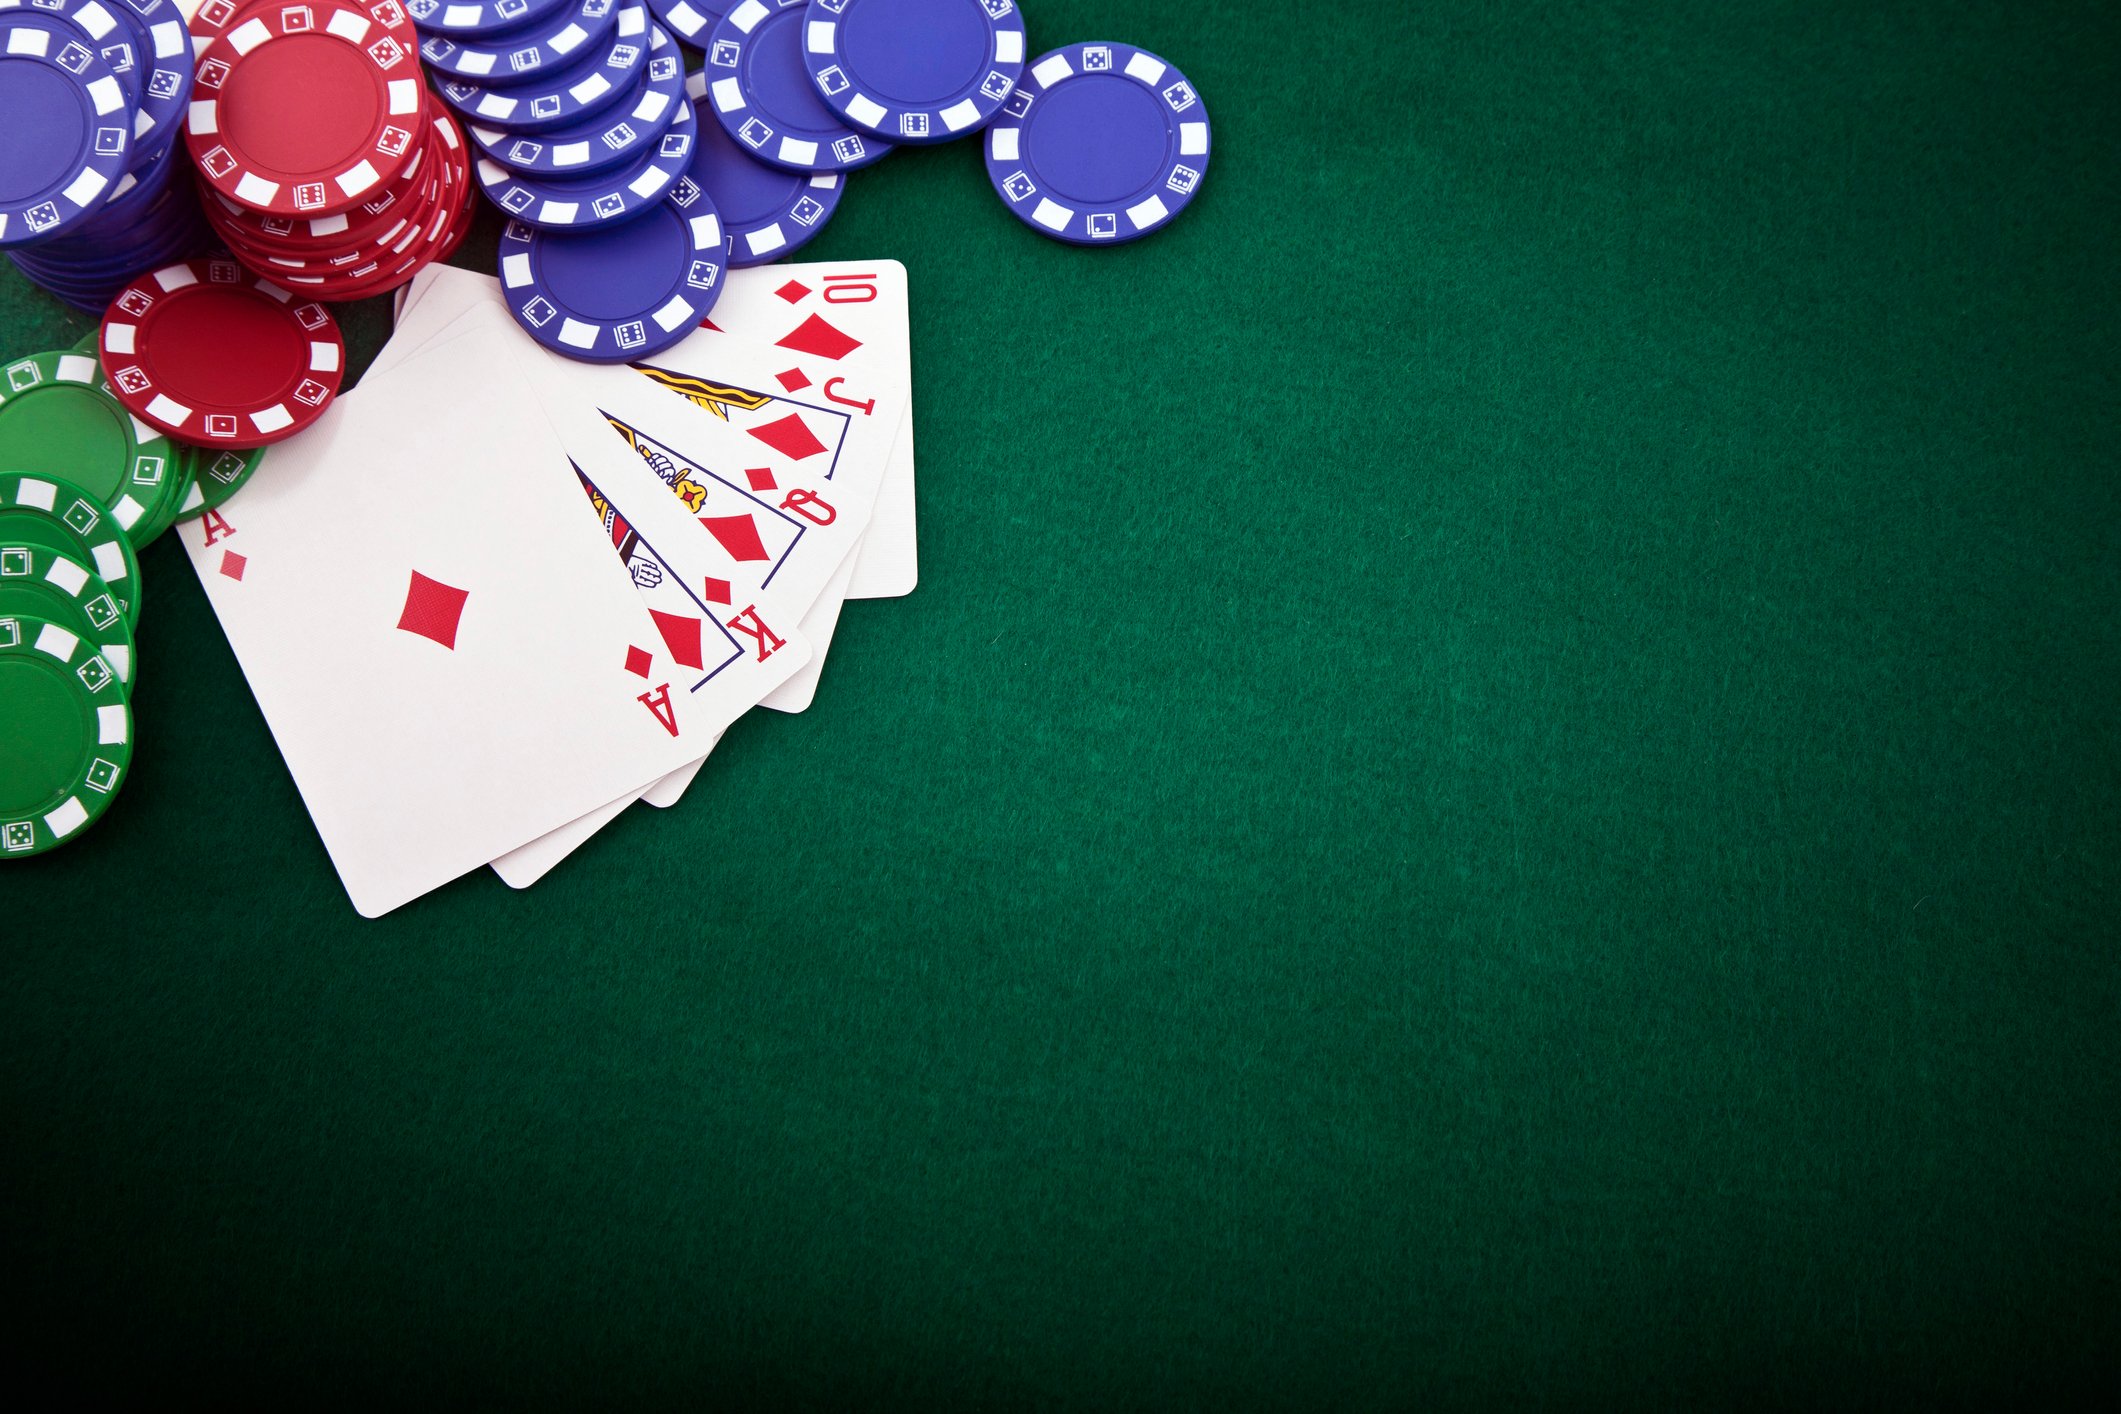 photo of a royal flush laid out on the poker table with chips scattered nearby